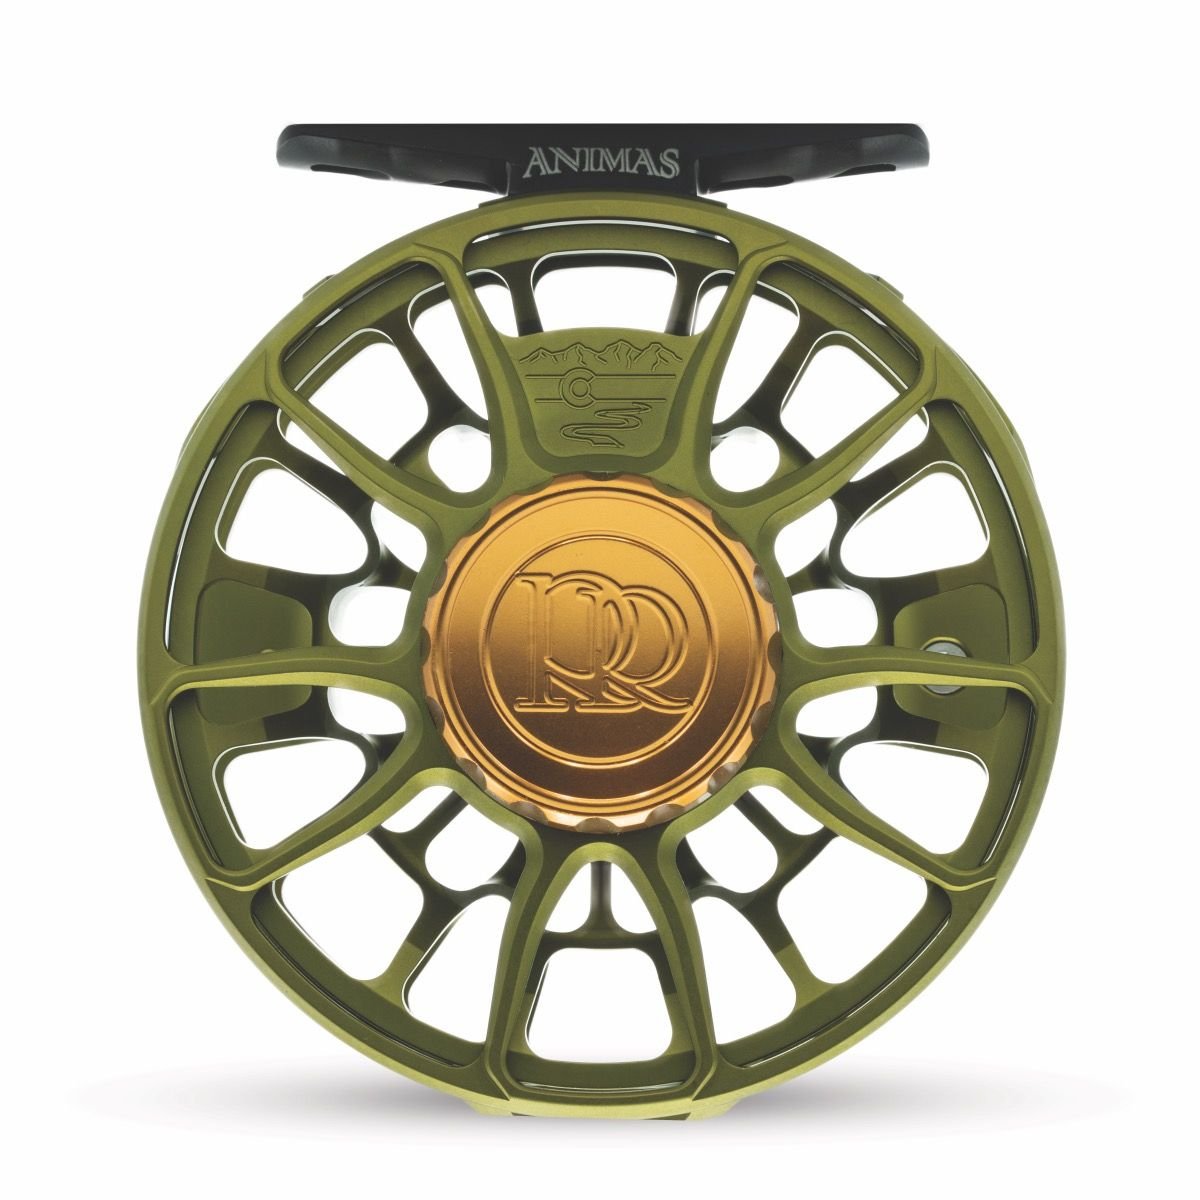 Ross Animas 5/6 Fly Reel - Olive - OLIVE - Mansfield Hunting & Fishing - Products to prepare for Corona Virus